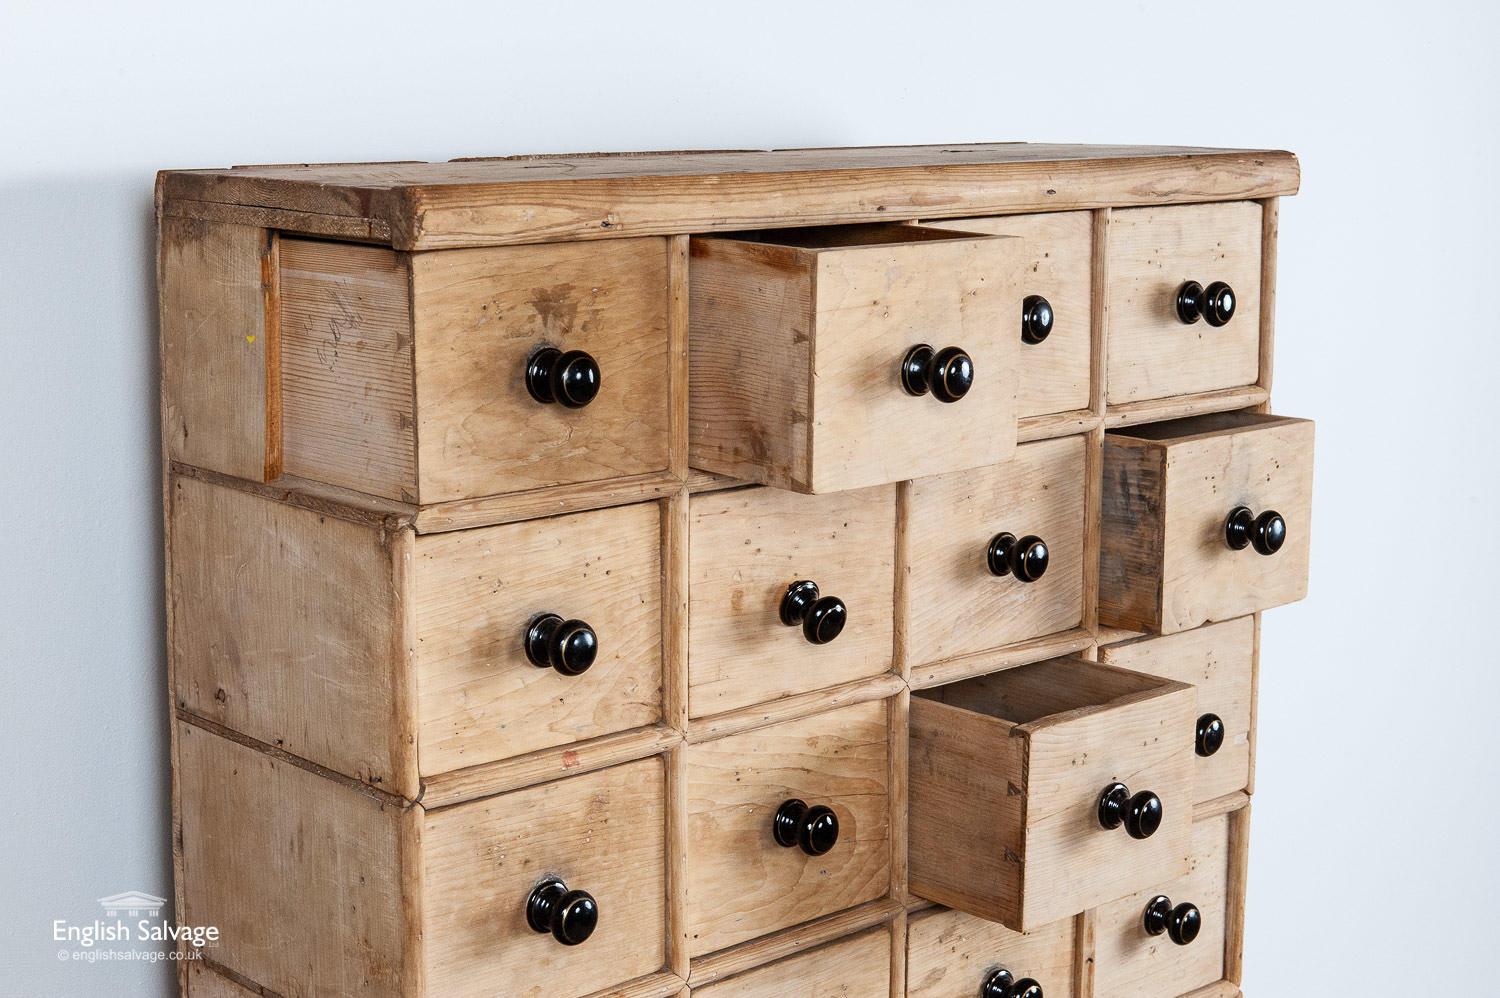 European Salvaged Pine Chest of 48 Drawers, 20th Century For Sale